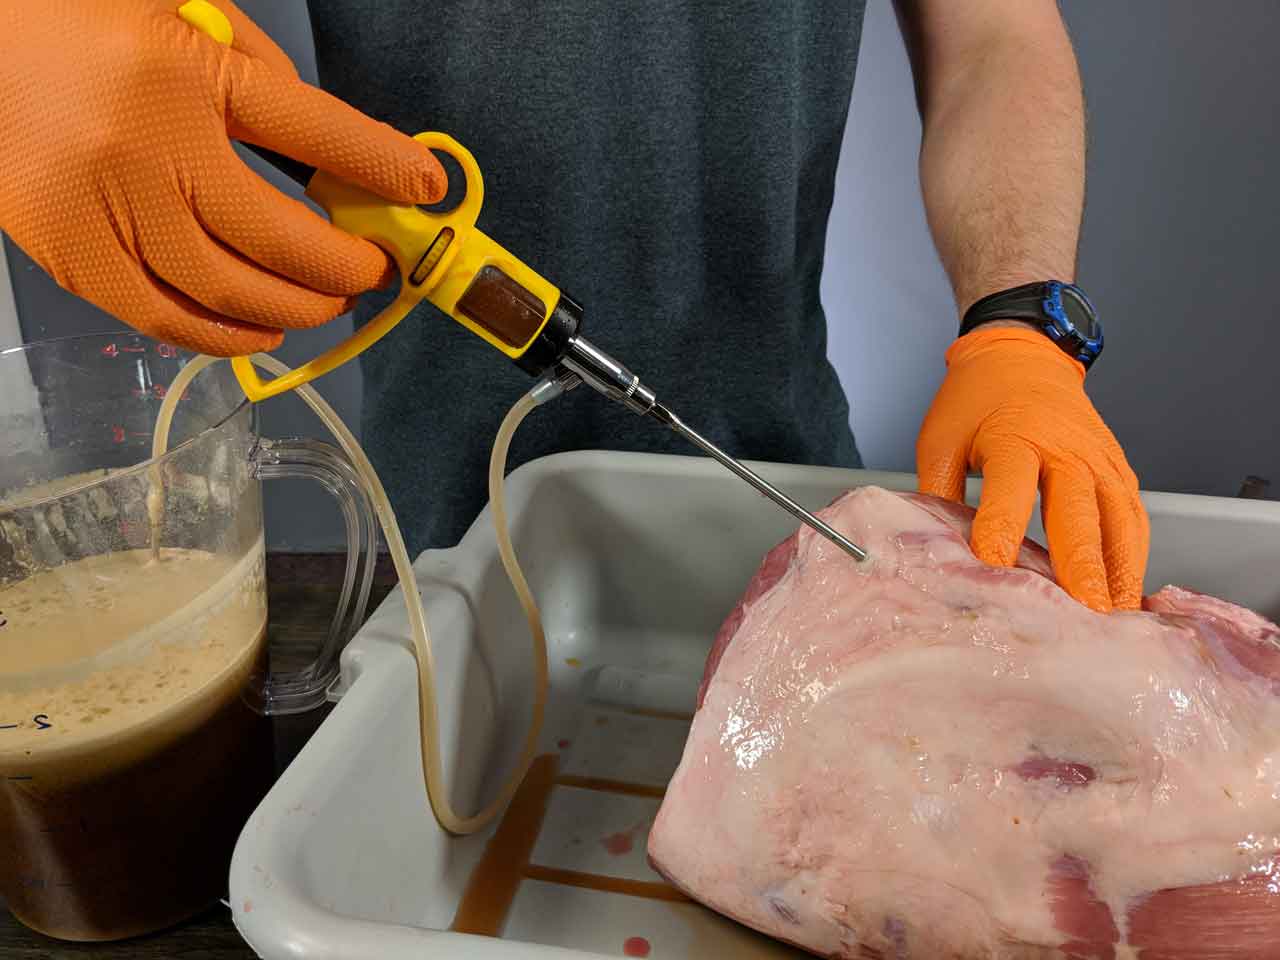 How To Inject Meat Without An Injector Easily (with 7 Steps) - NATURE LEAF KITCHEN